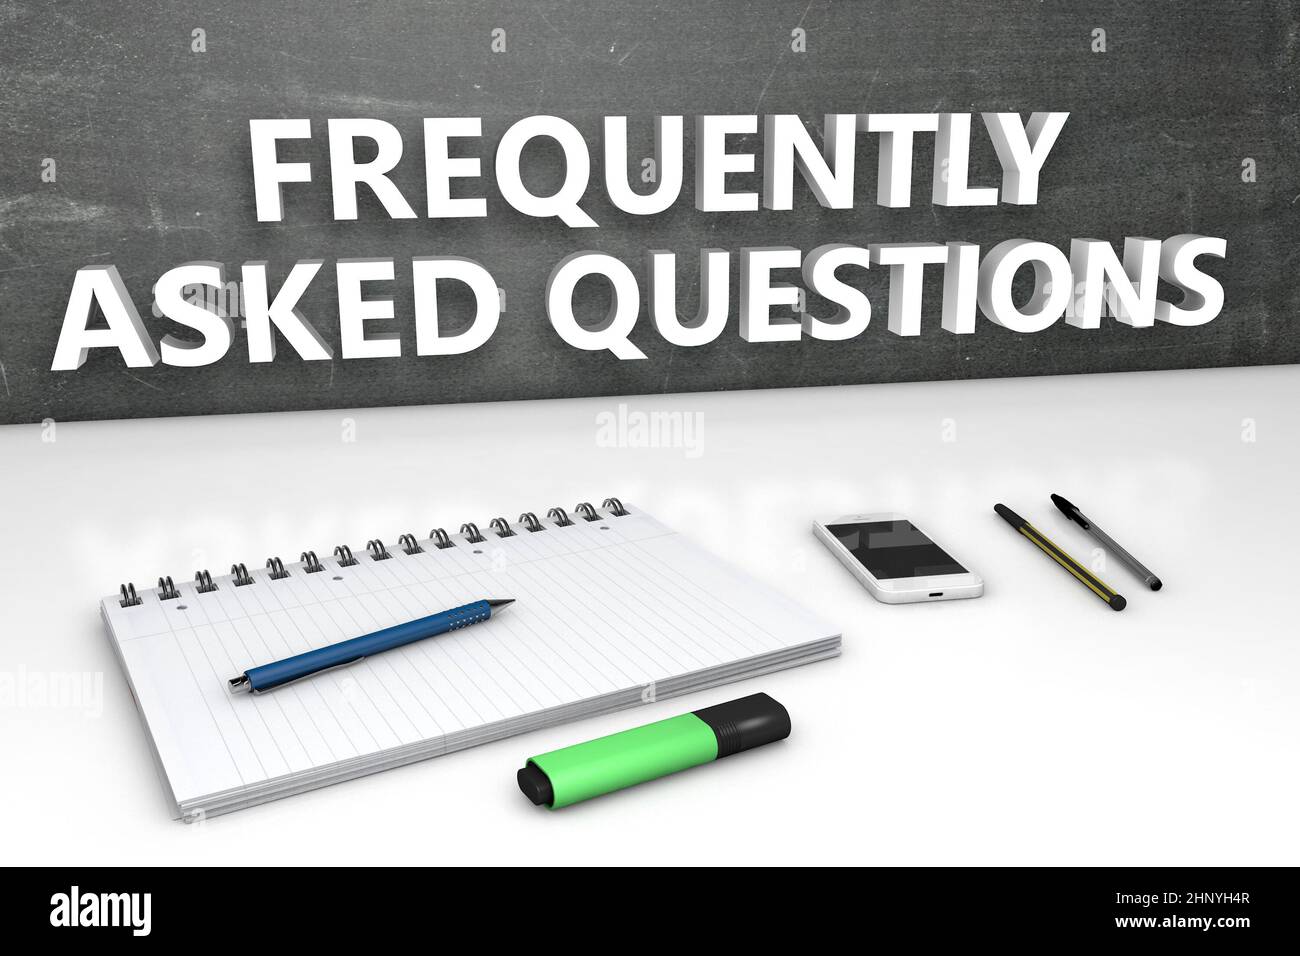 FAQ - Frequently asked Questions - text concept with chalkboard, notebook, pens and mobile phone. 3D render illustration. Stock Photo